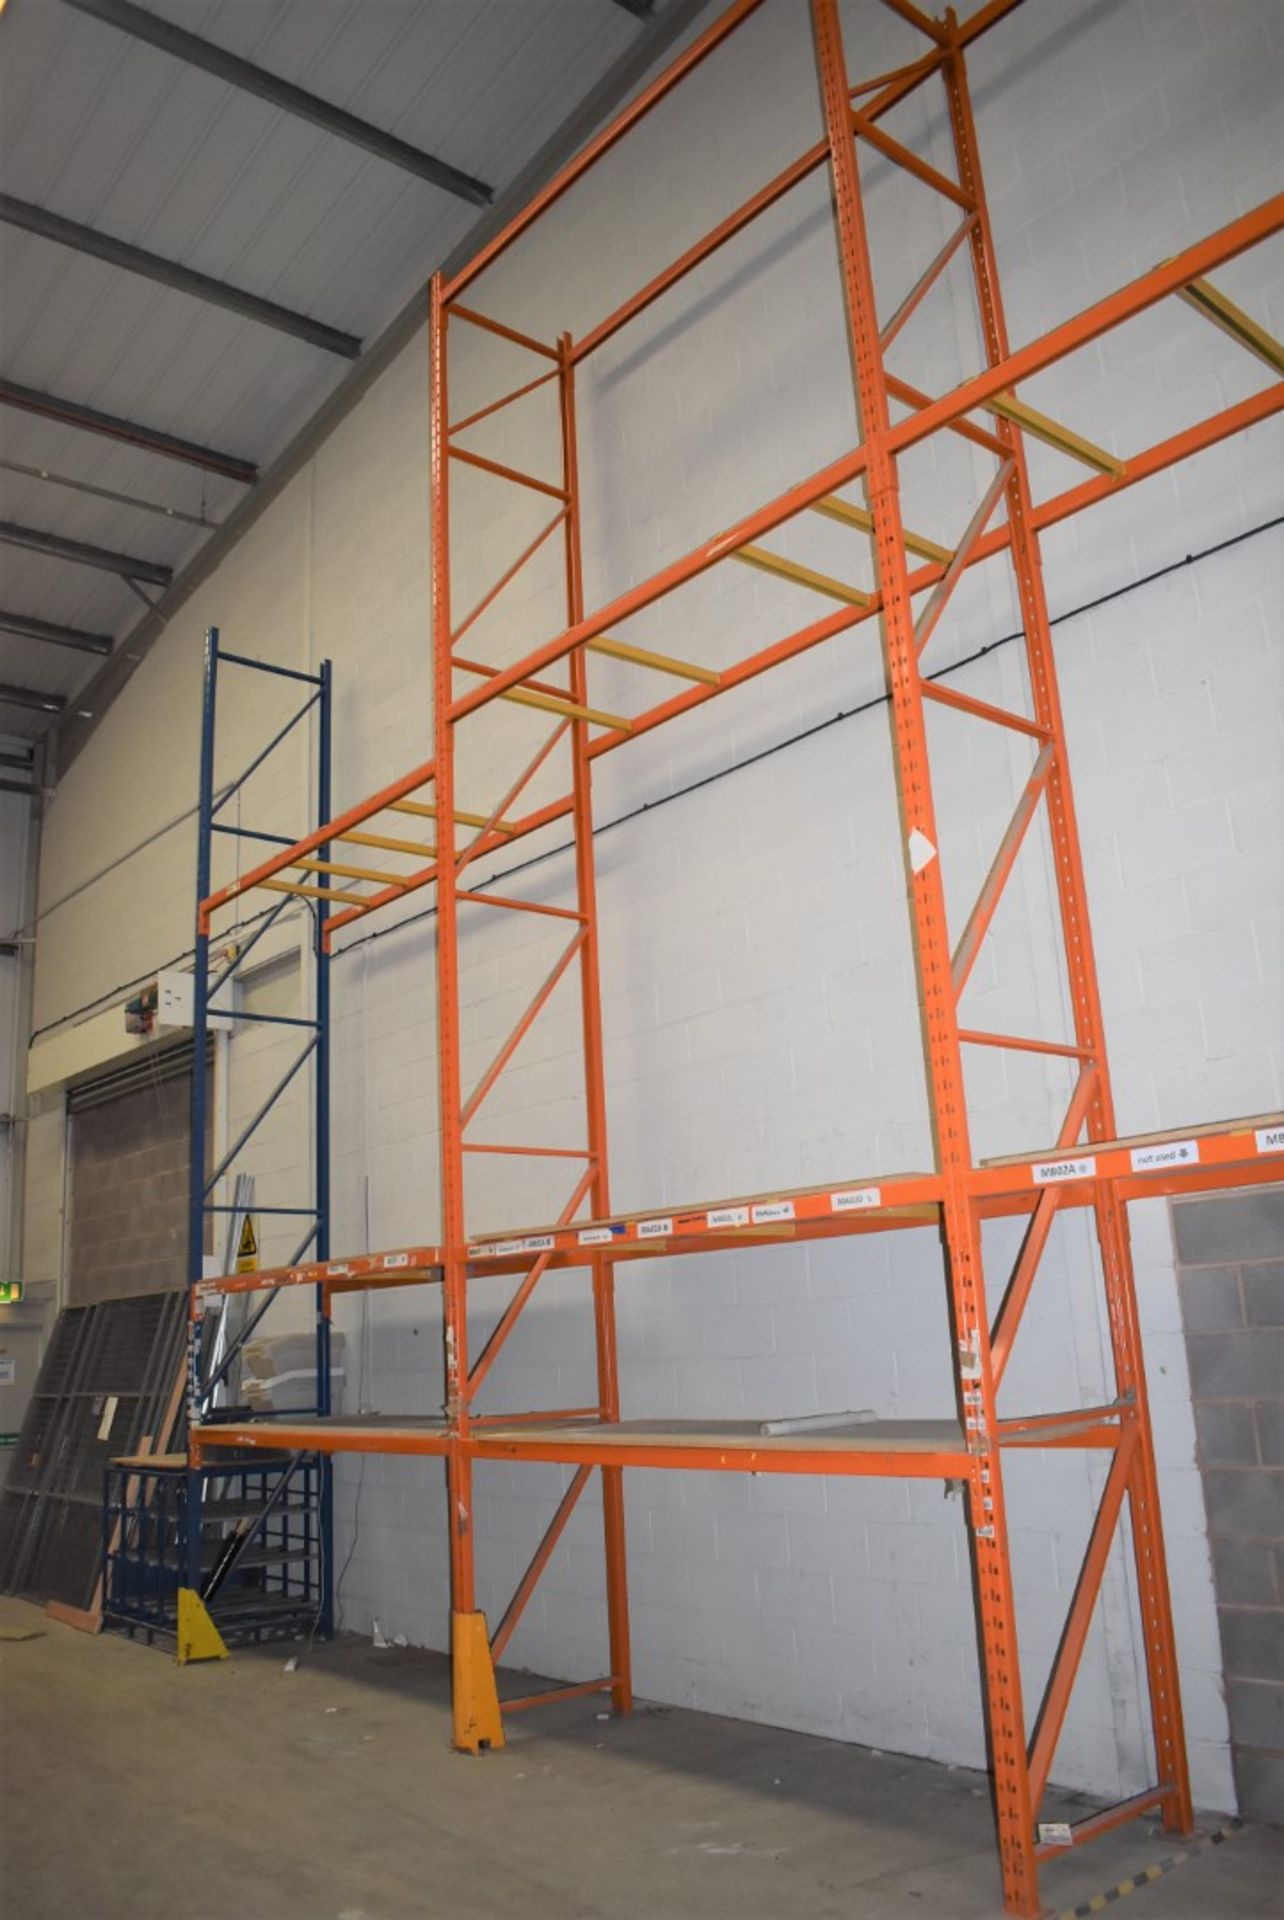 4 x Bays of RediRack Warehouse Pallet Racking - Lot Includes 5 x Uprights and 26 x Crossbeams - - Image 6 of 7